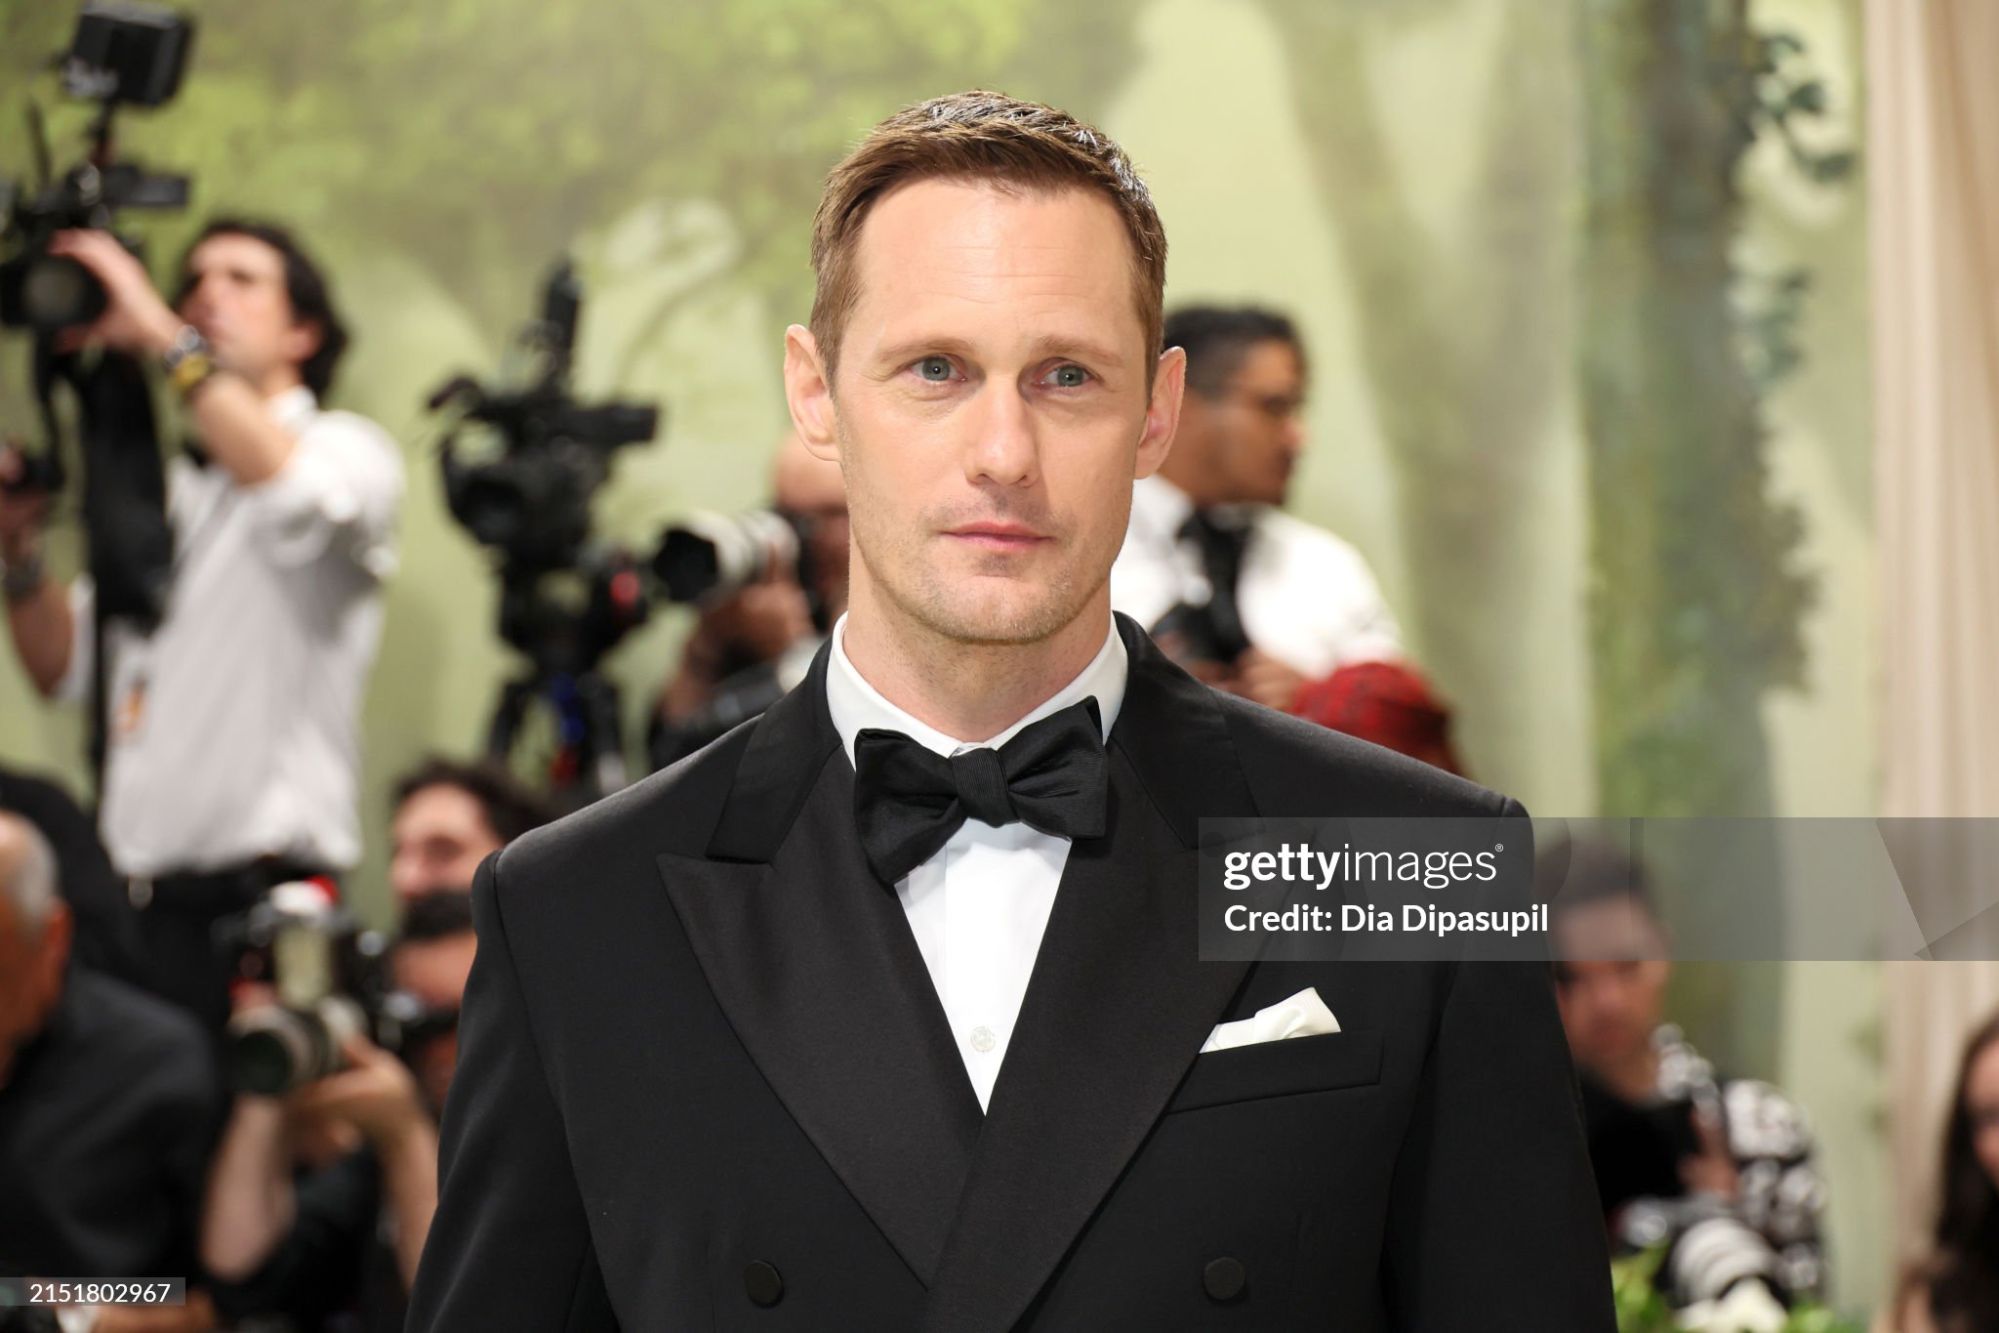 gettyimages-2151802967-2048x2048.jpg